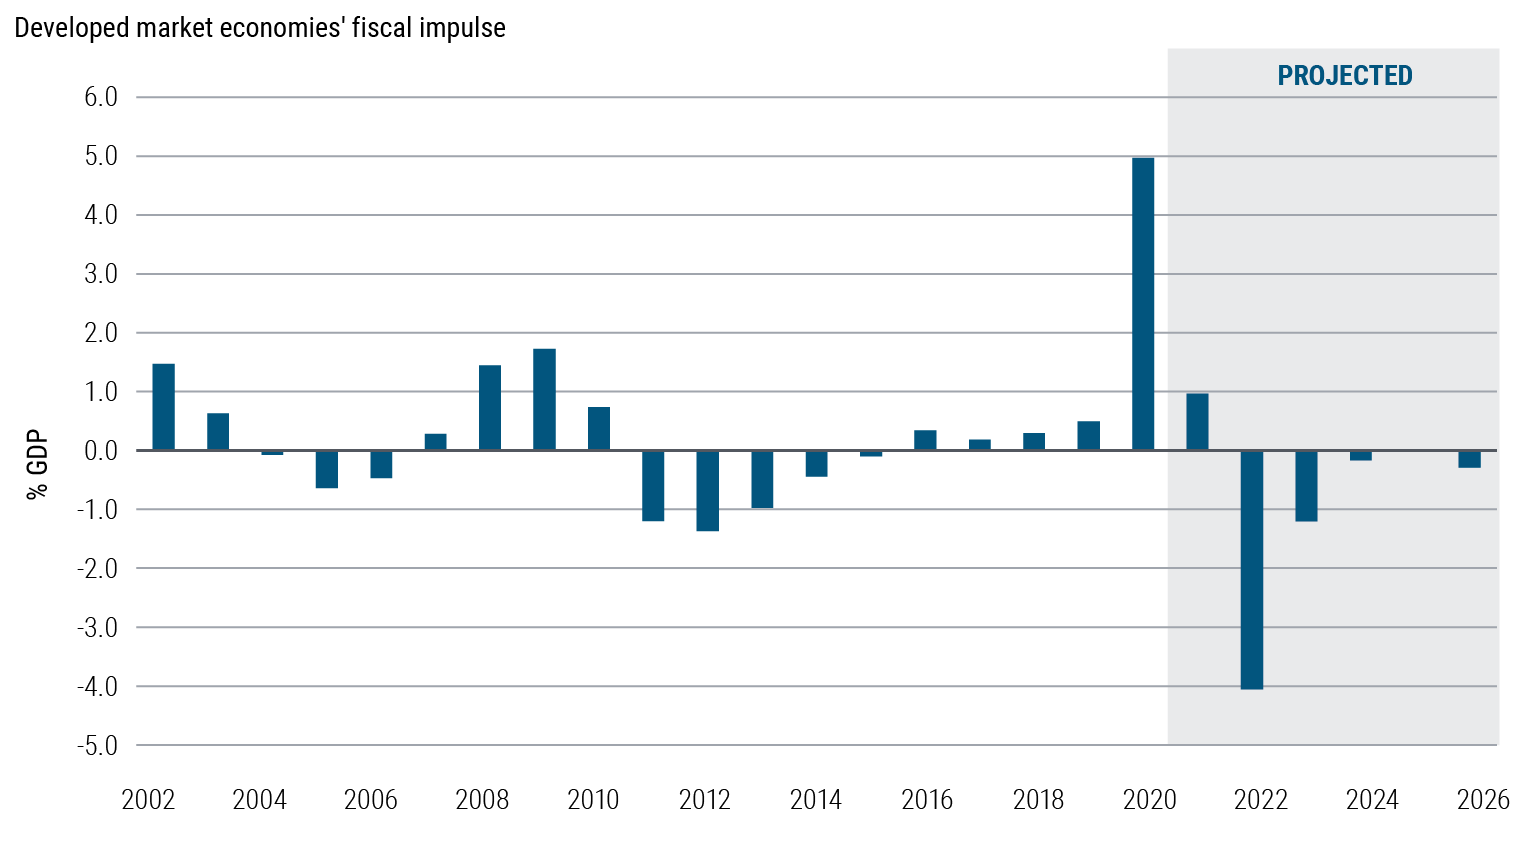 Figure 1 is a bar chart showing the annual fiscal impulse across the U.S., U.K., EU, Canada, and Japan, as measured by the GDP-weighted change in the structural primary balance. From 2002 to 2019, the figure ranges between −1.5% and 1.5%, but in 2020, it surged to 4.9%. PIMCO's projections are for the fiscal impulse to fall to 0.9% in 2021, and then to −4.1% in 2022, exerting a fiscal drag before moderating in the years that follow.